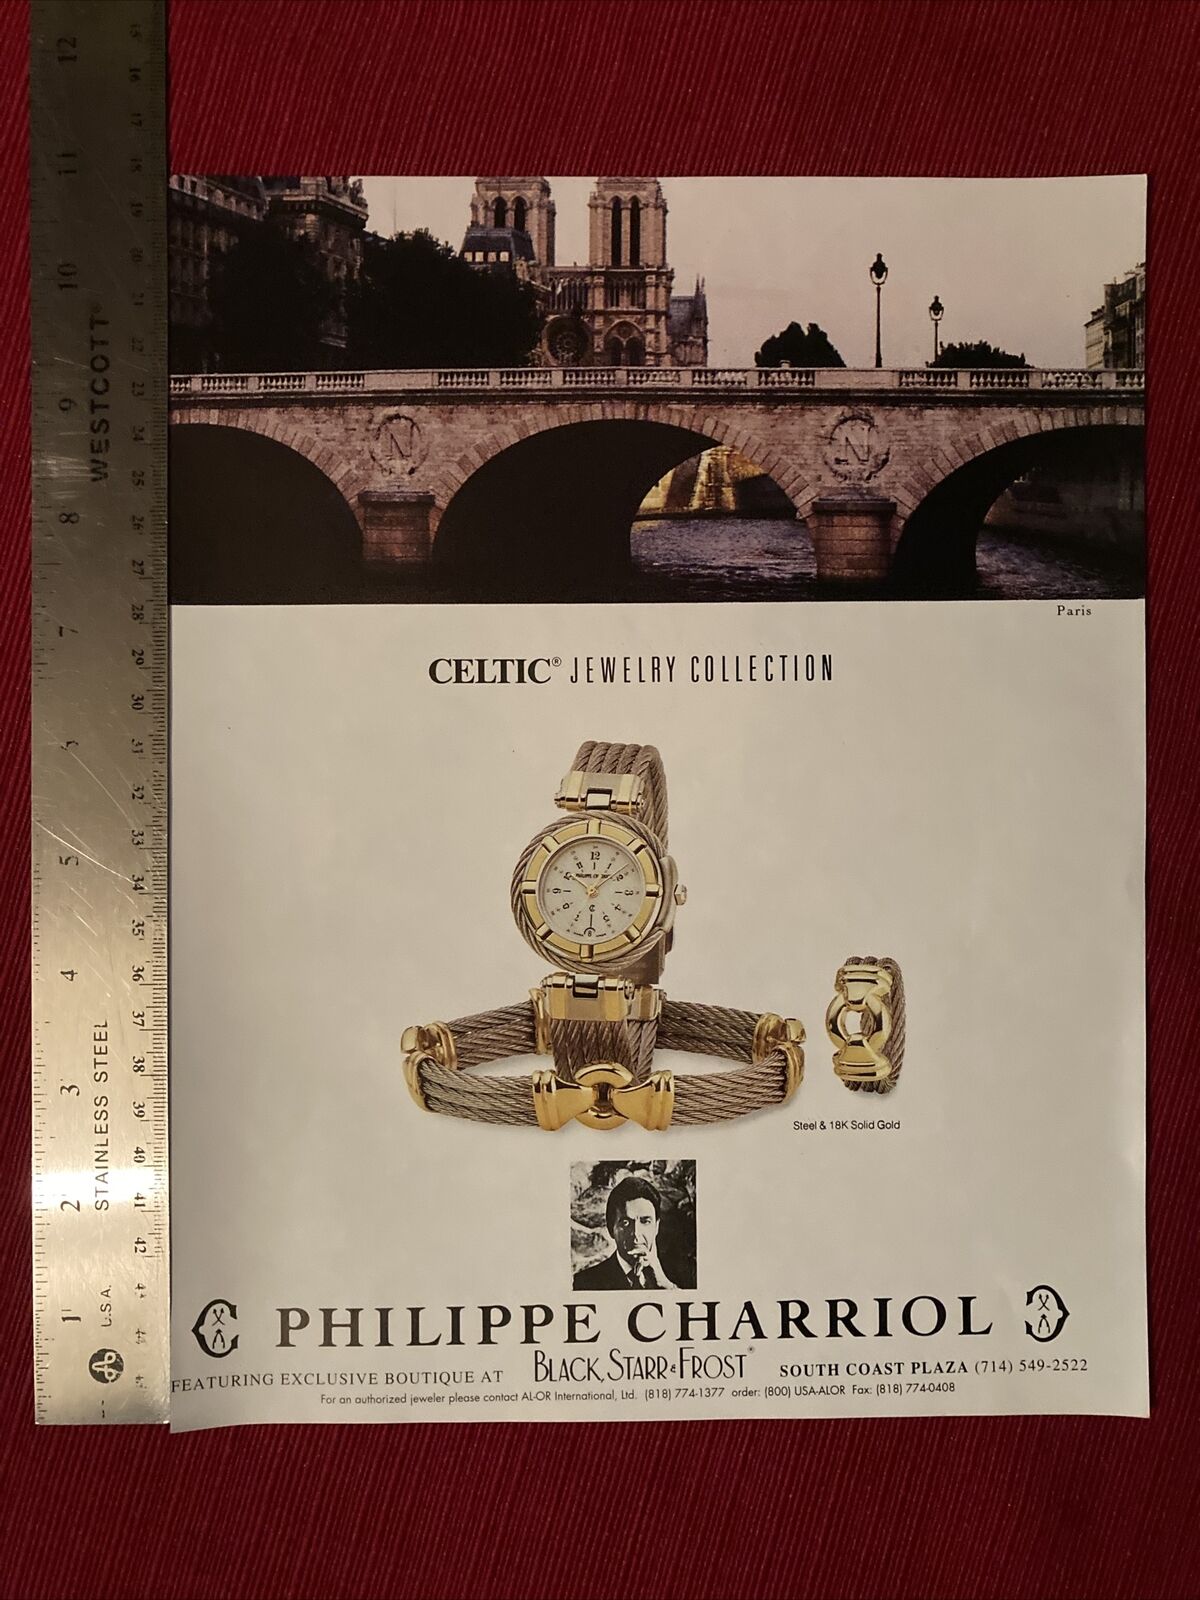 Philippe Charriol Celtic Jewelry Collection 1992 Print Ad - Great To Frame